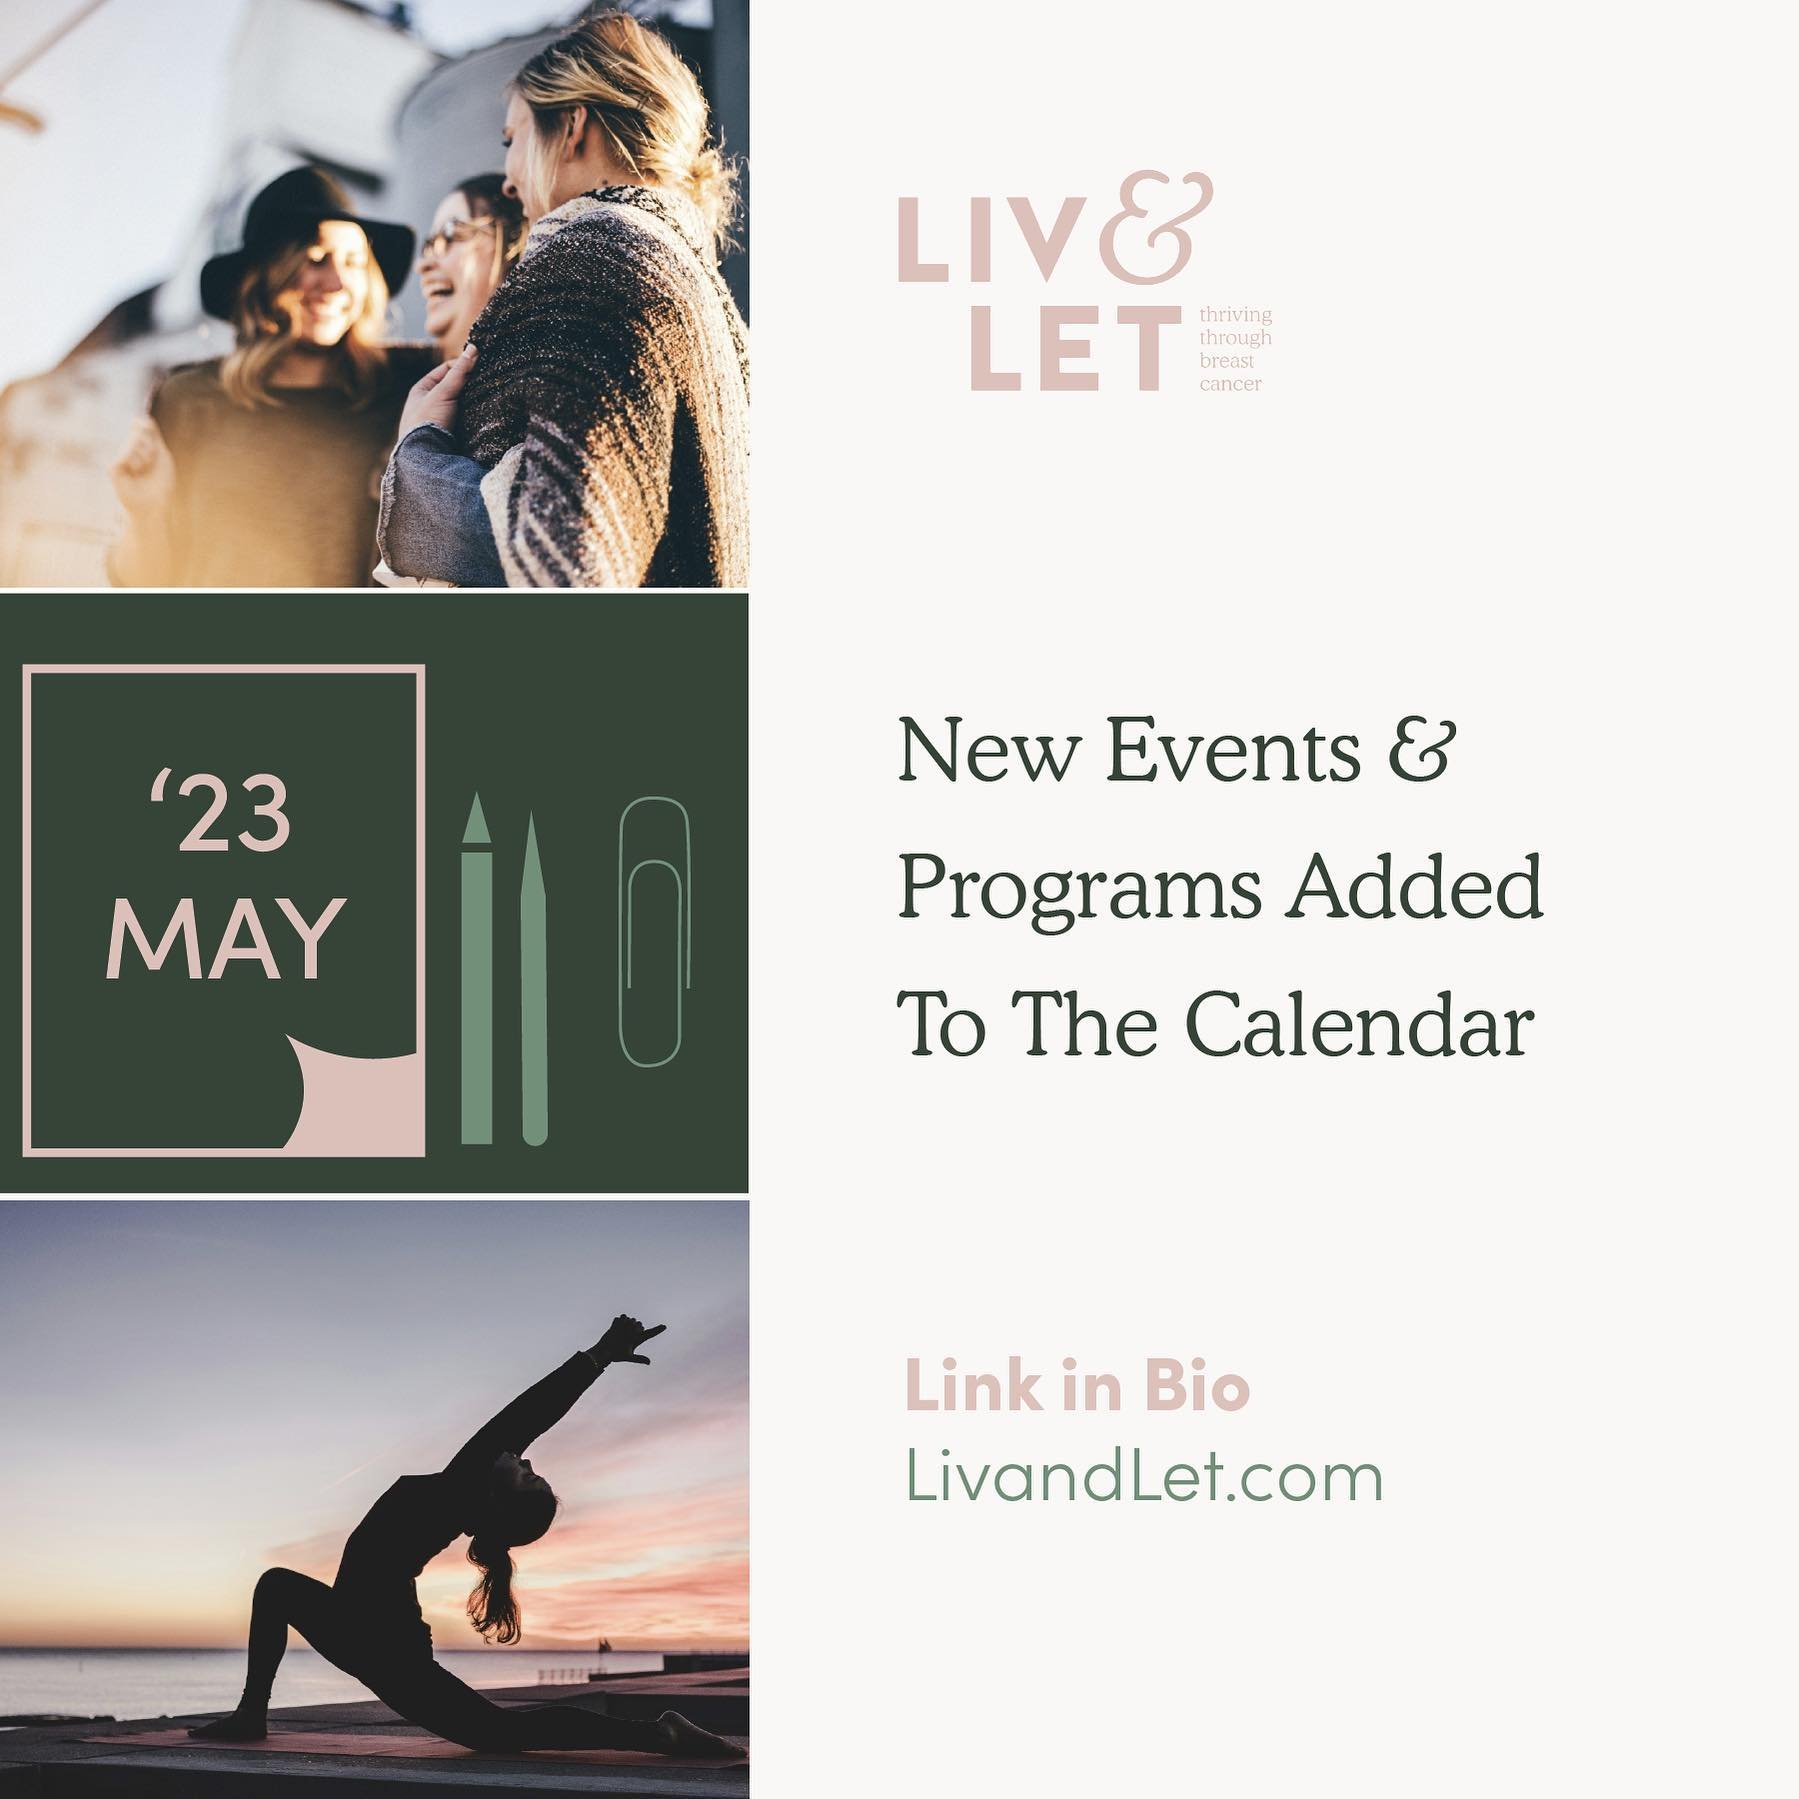 📅The community calendar has been updated with events to feed your soul and provide you with comfort and support. There are many organizations out there creating programs and events to support the cancer and mental health communities- all who are imp